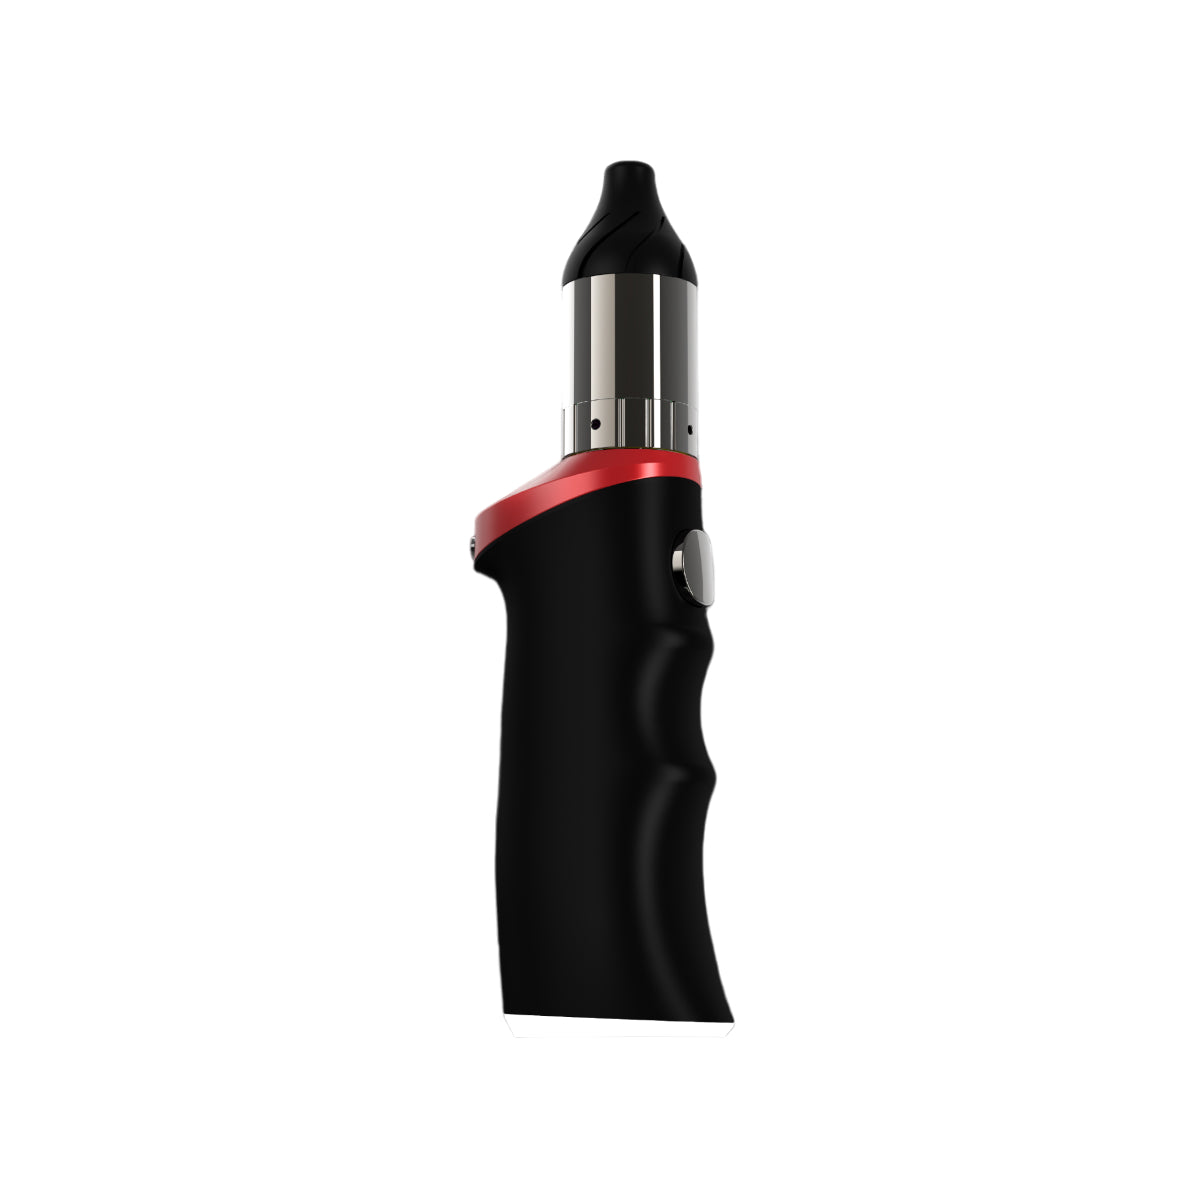 Yocan Black Phaser Ace Wax Vaporizer - Red wholesale